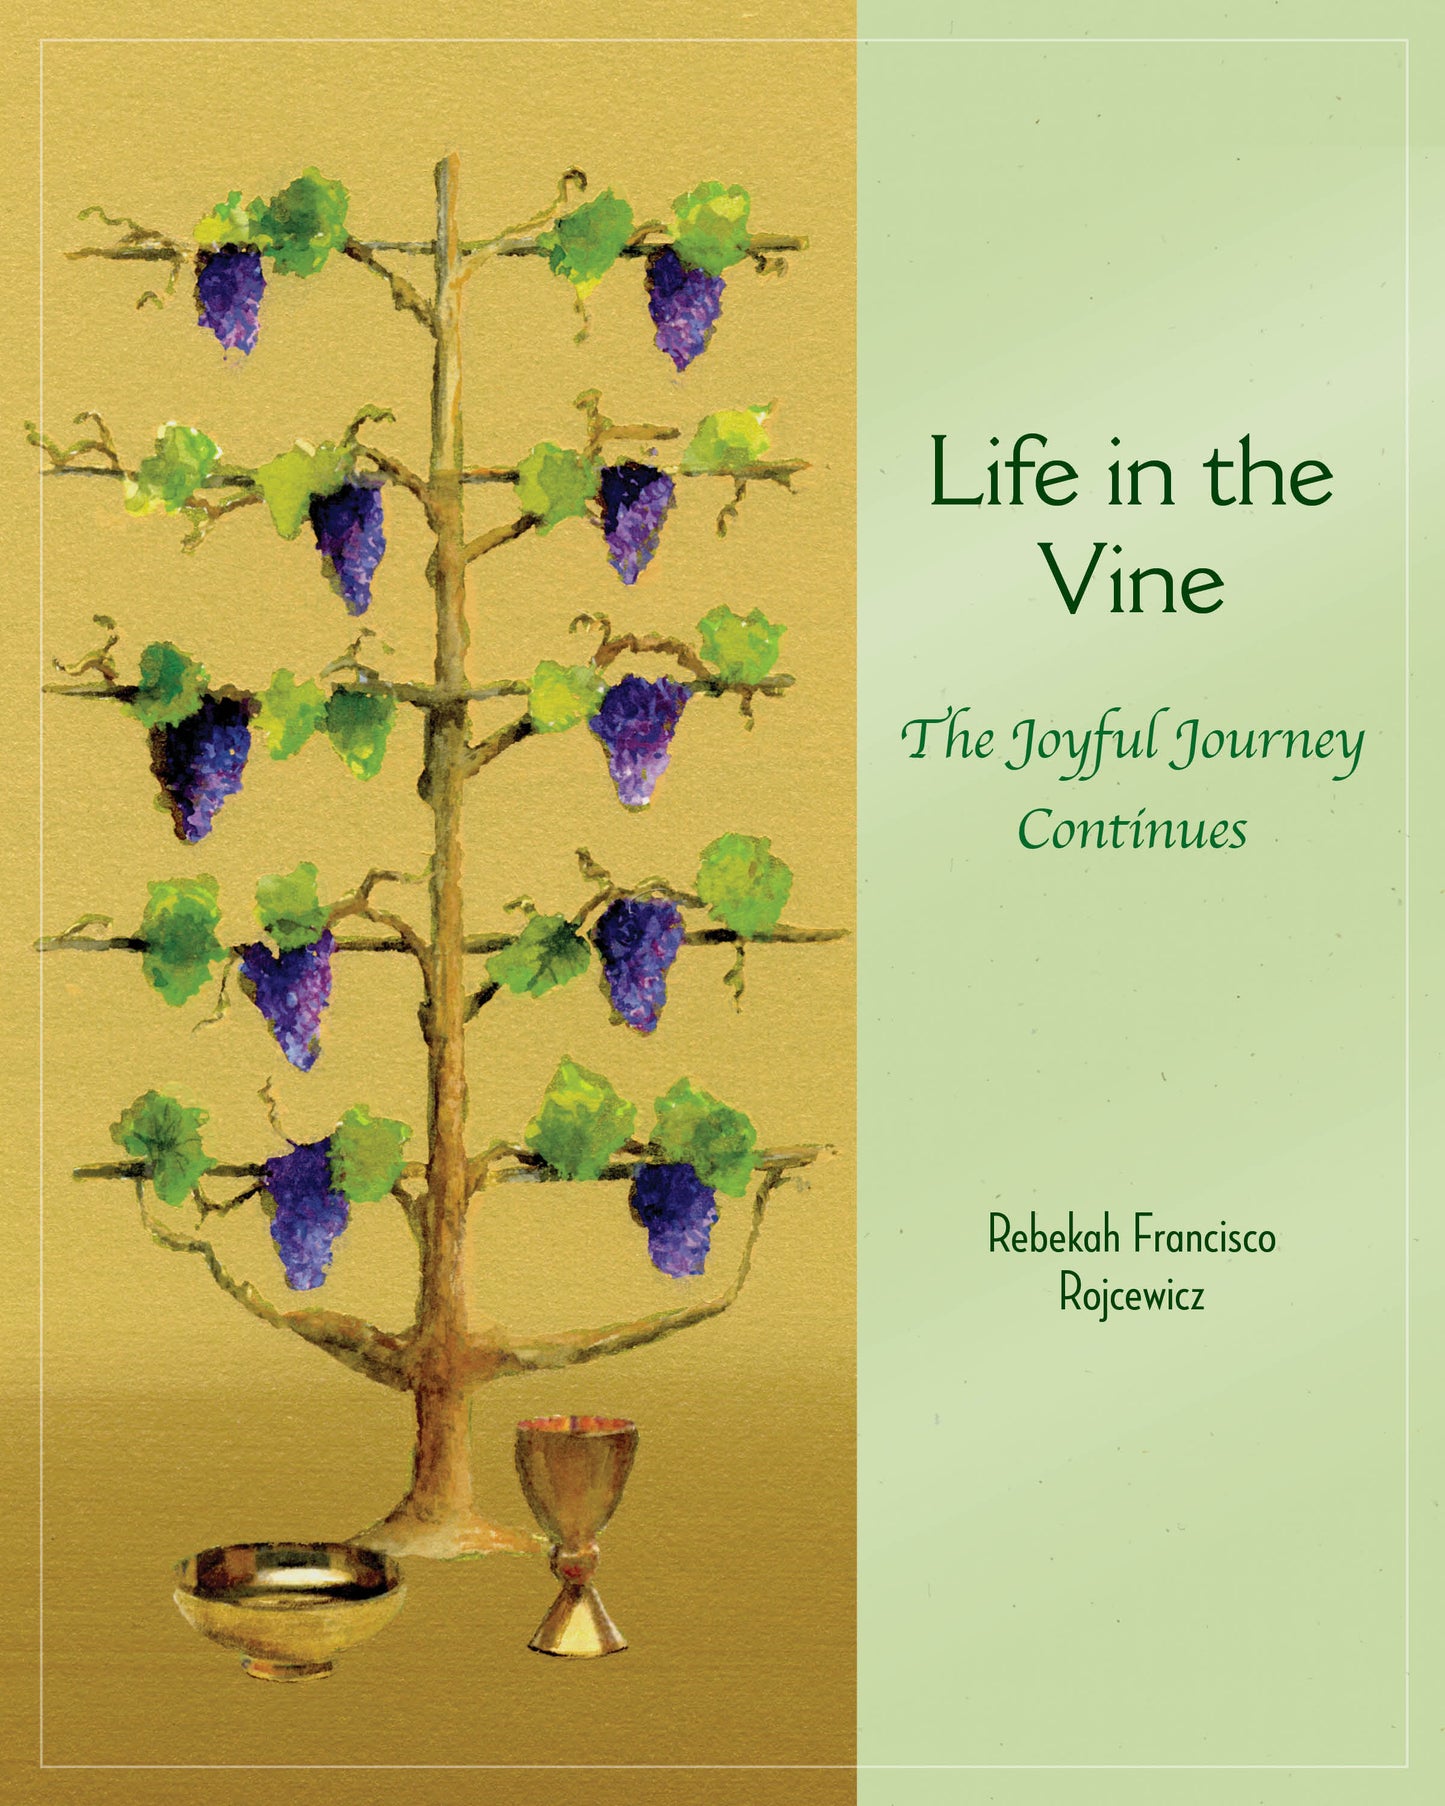 Life in the Vine: The Joyful Journey Continues